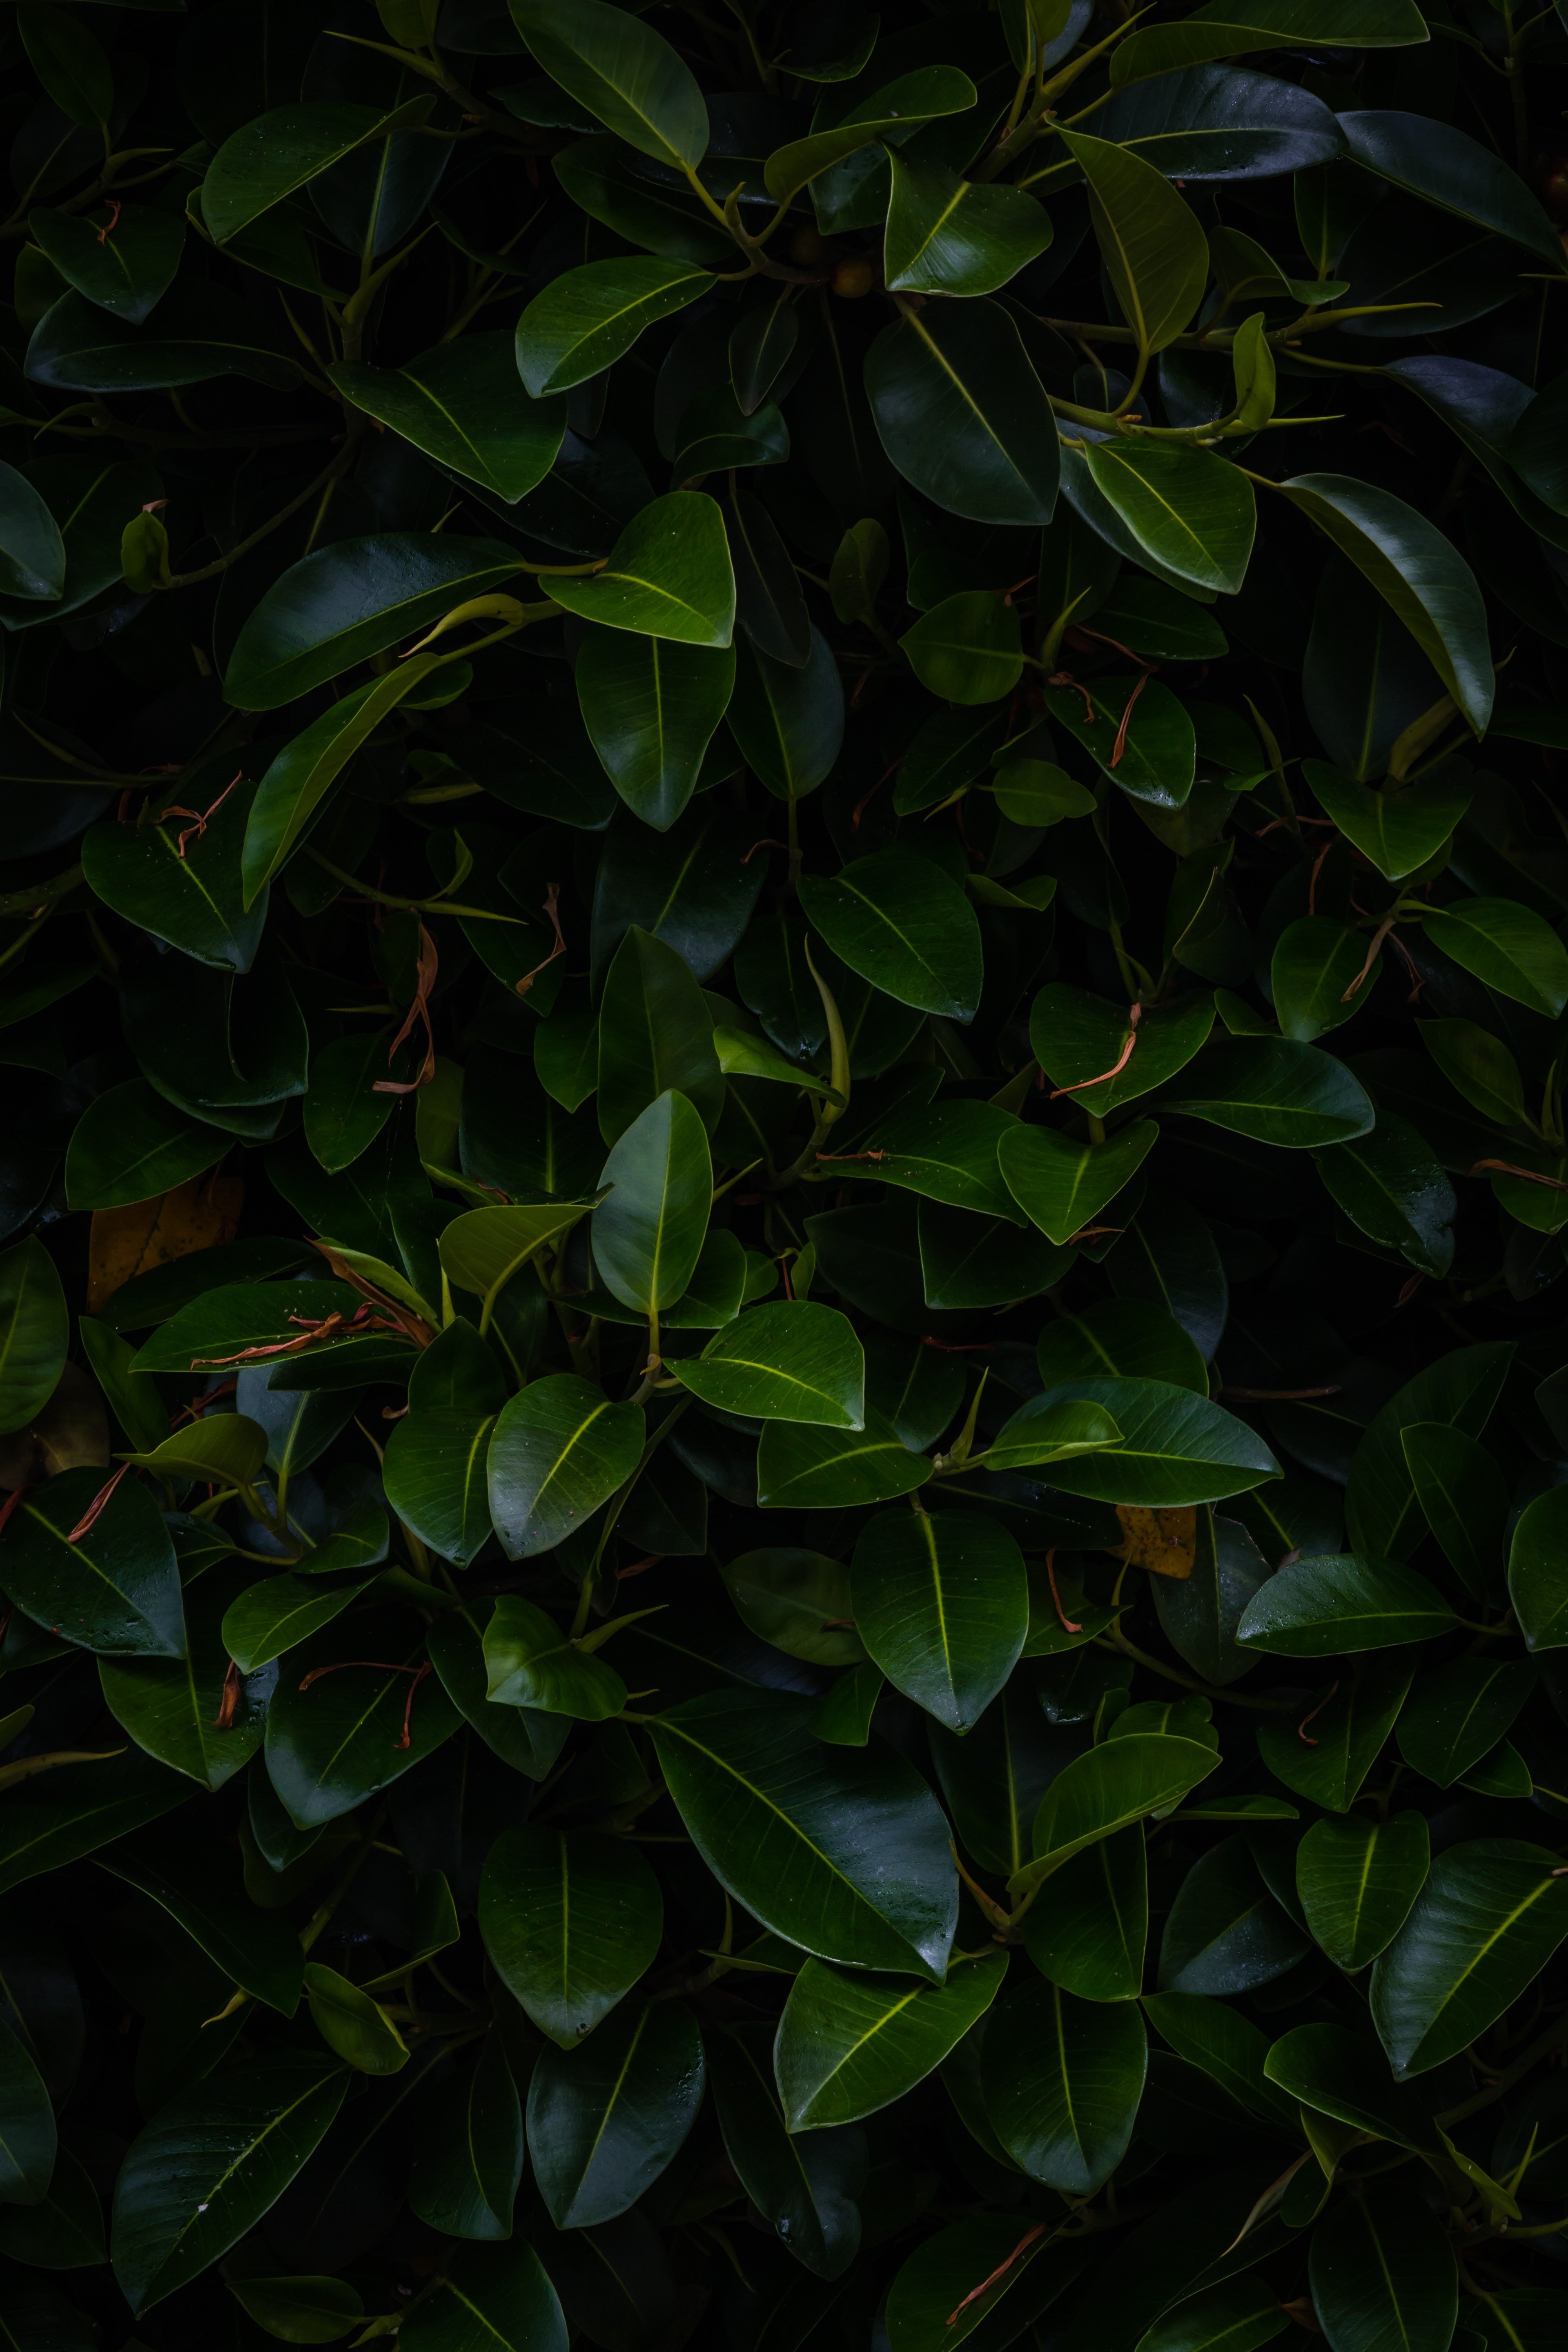 69842 download wallpaper green, dark, nature, leaves, plant, branches screensavers and pictures for free